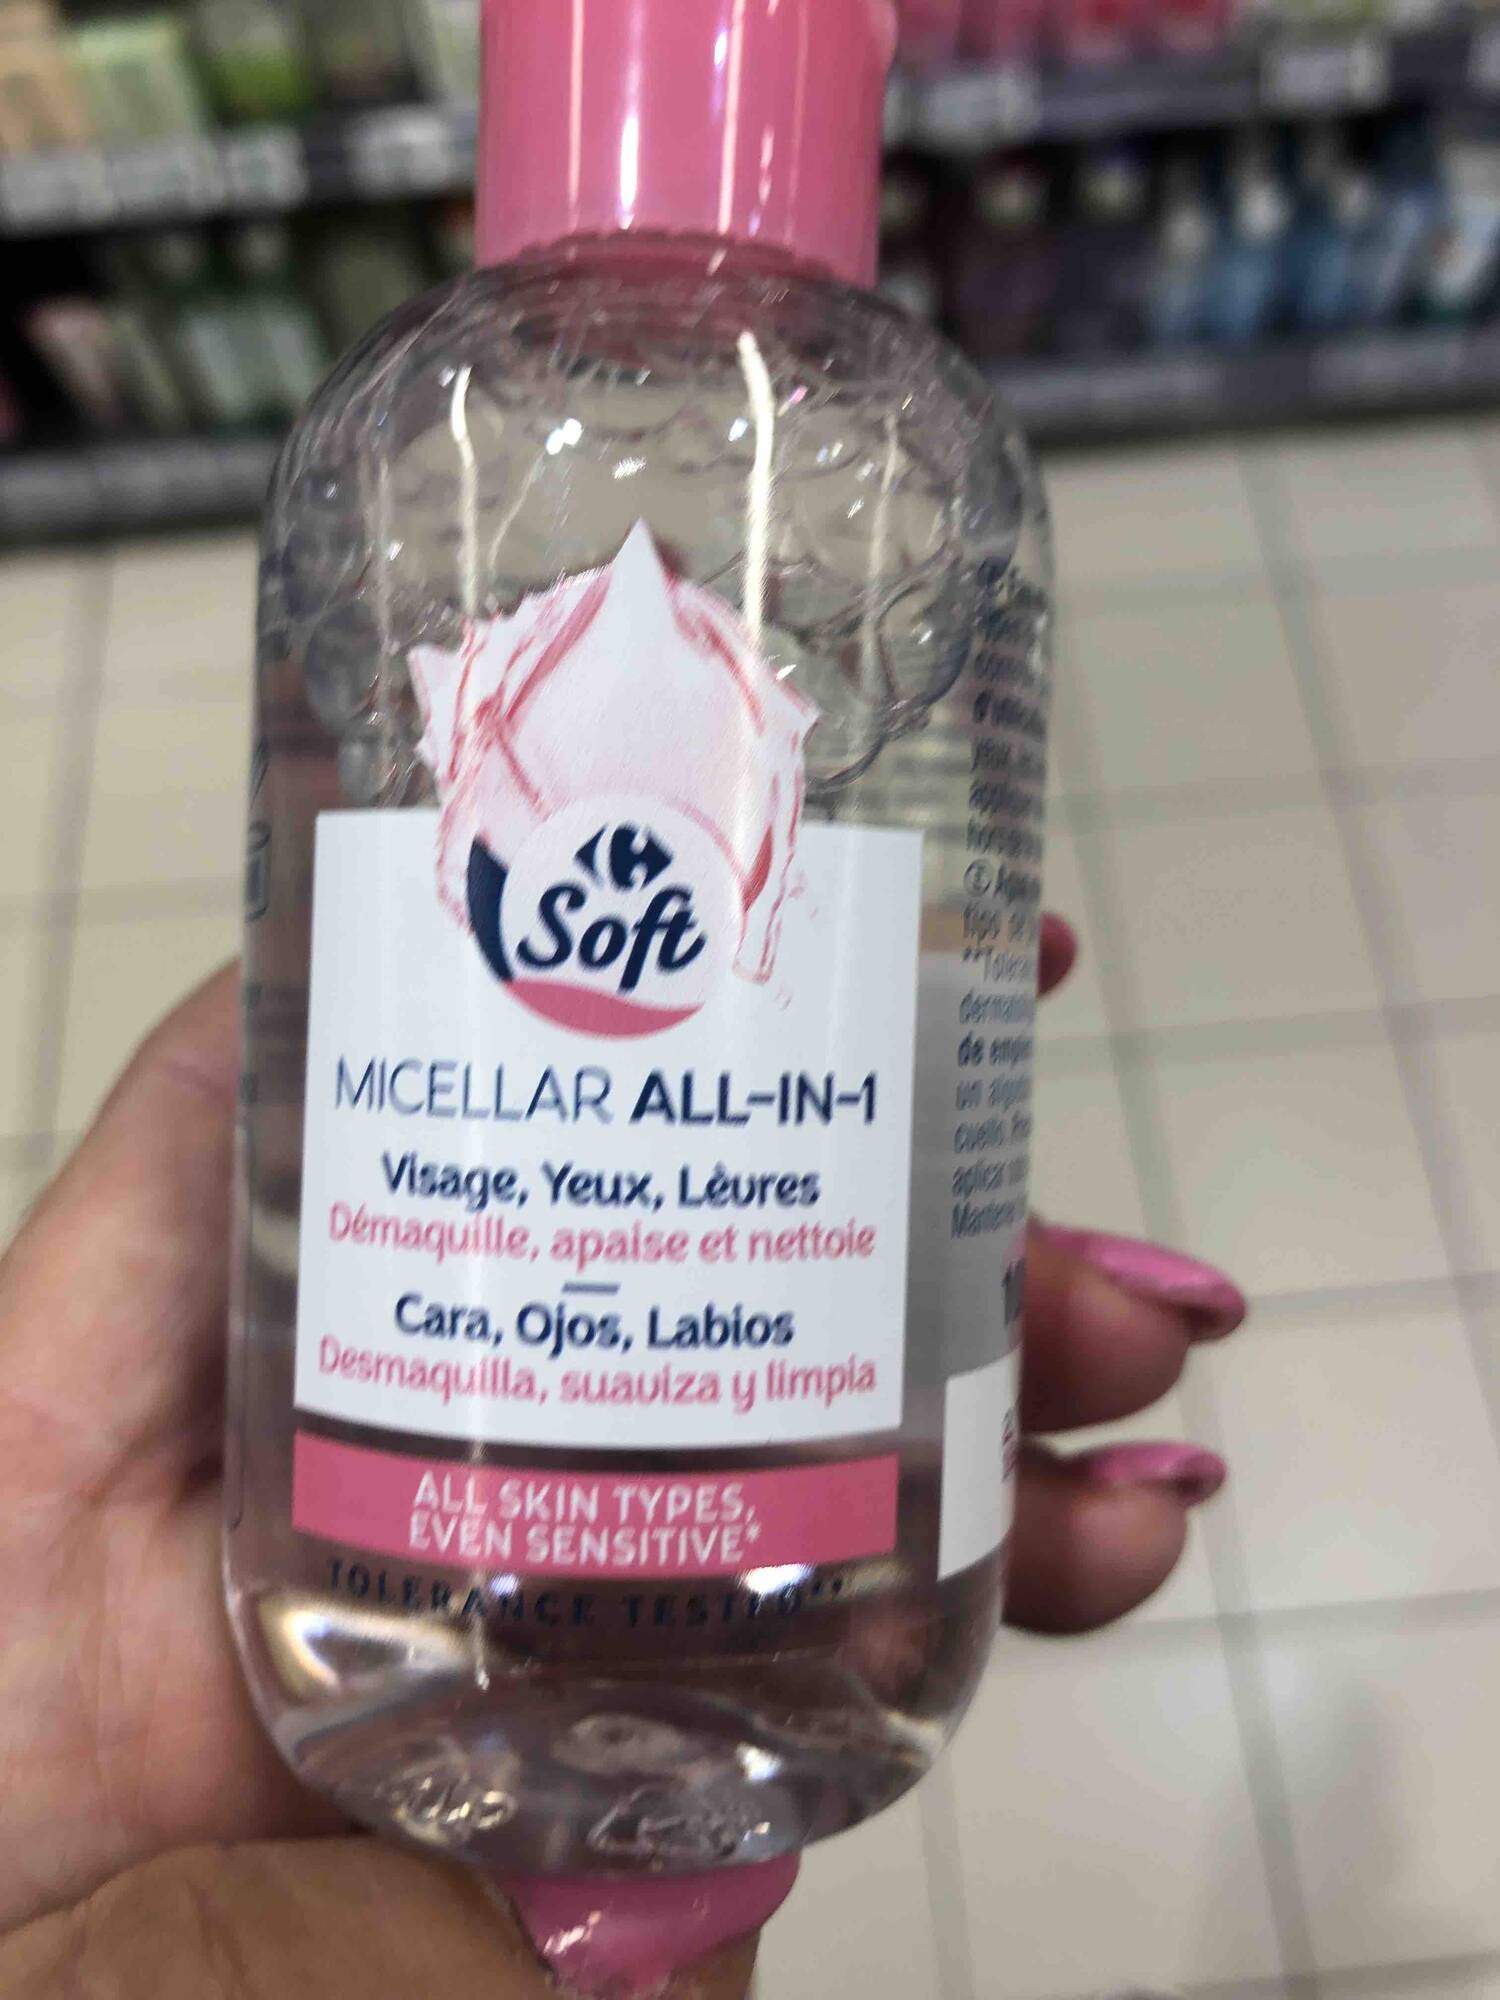 CARREFOUR - Soft - Micellar all-in-1